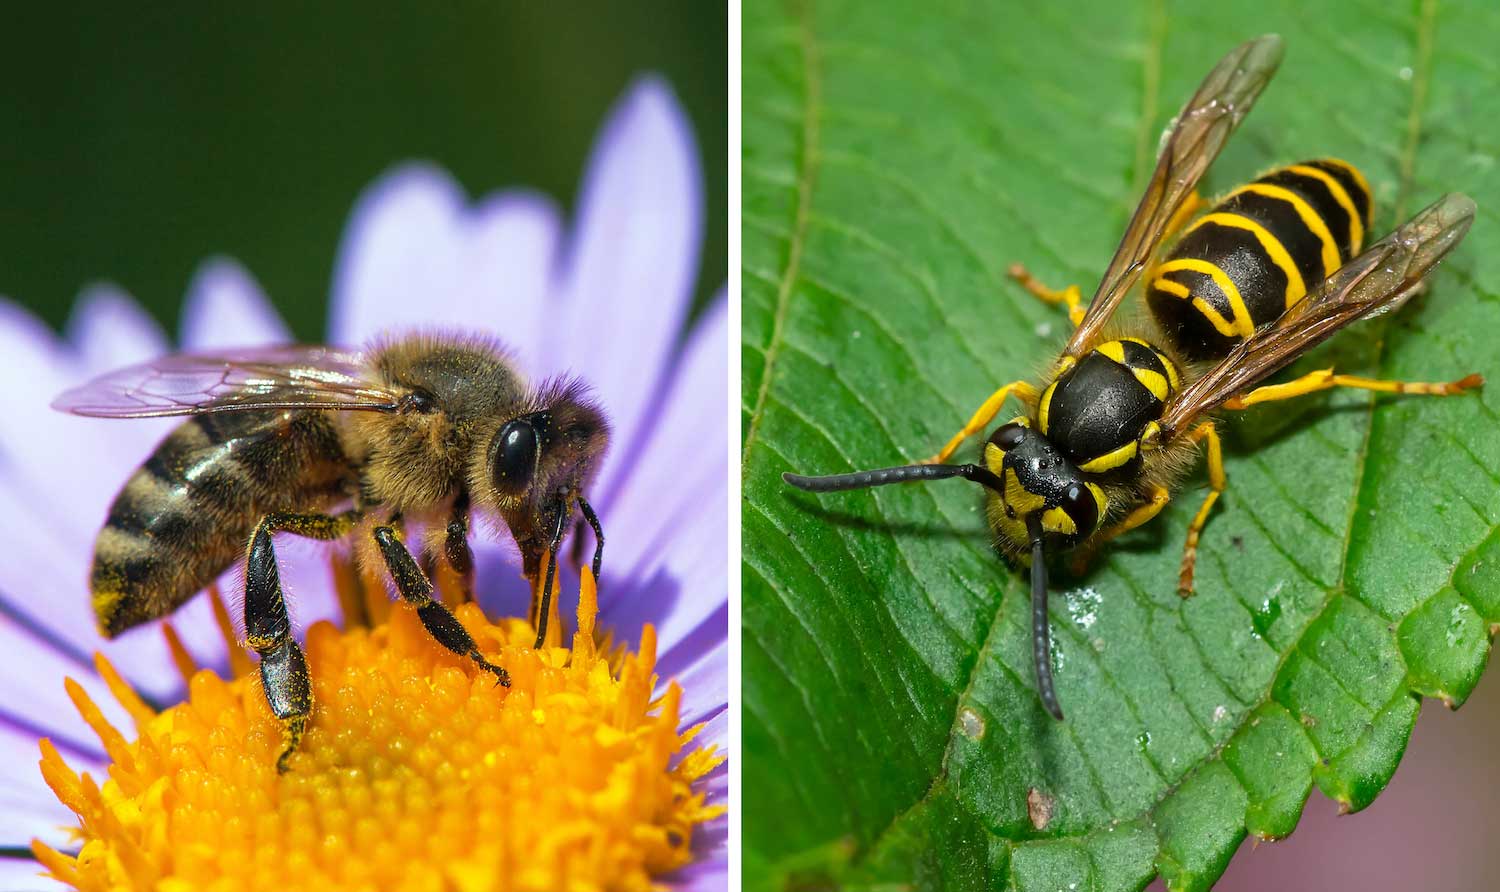 A side-by-side comparison of a honeybee and a yellow jacket.